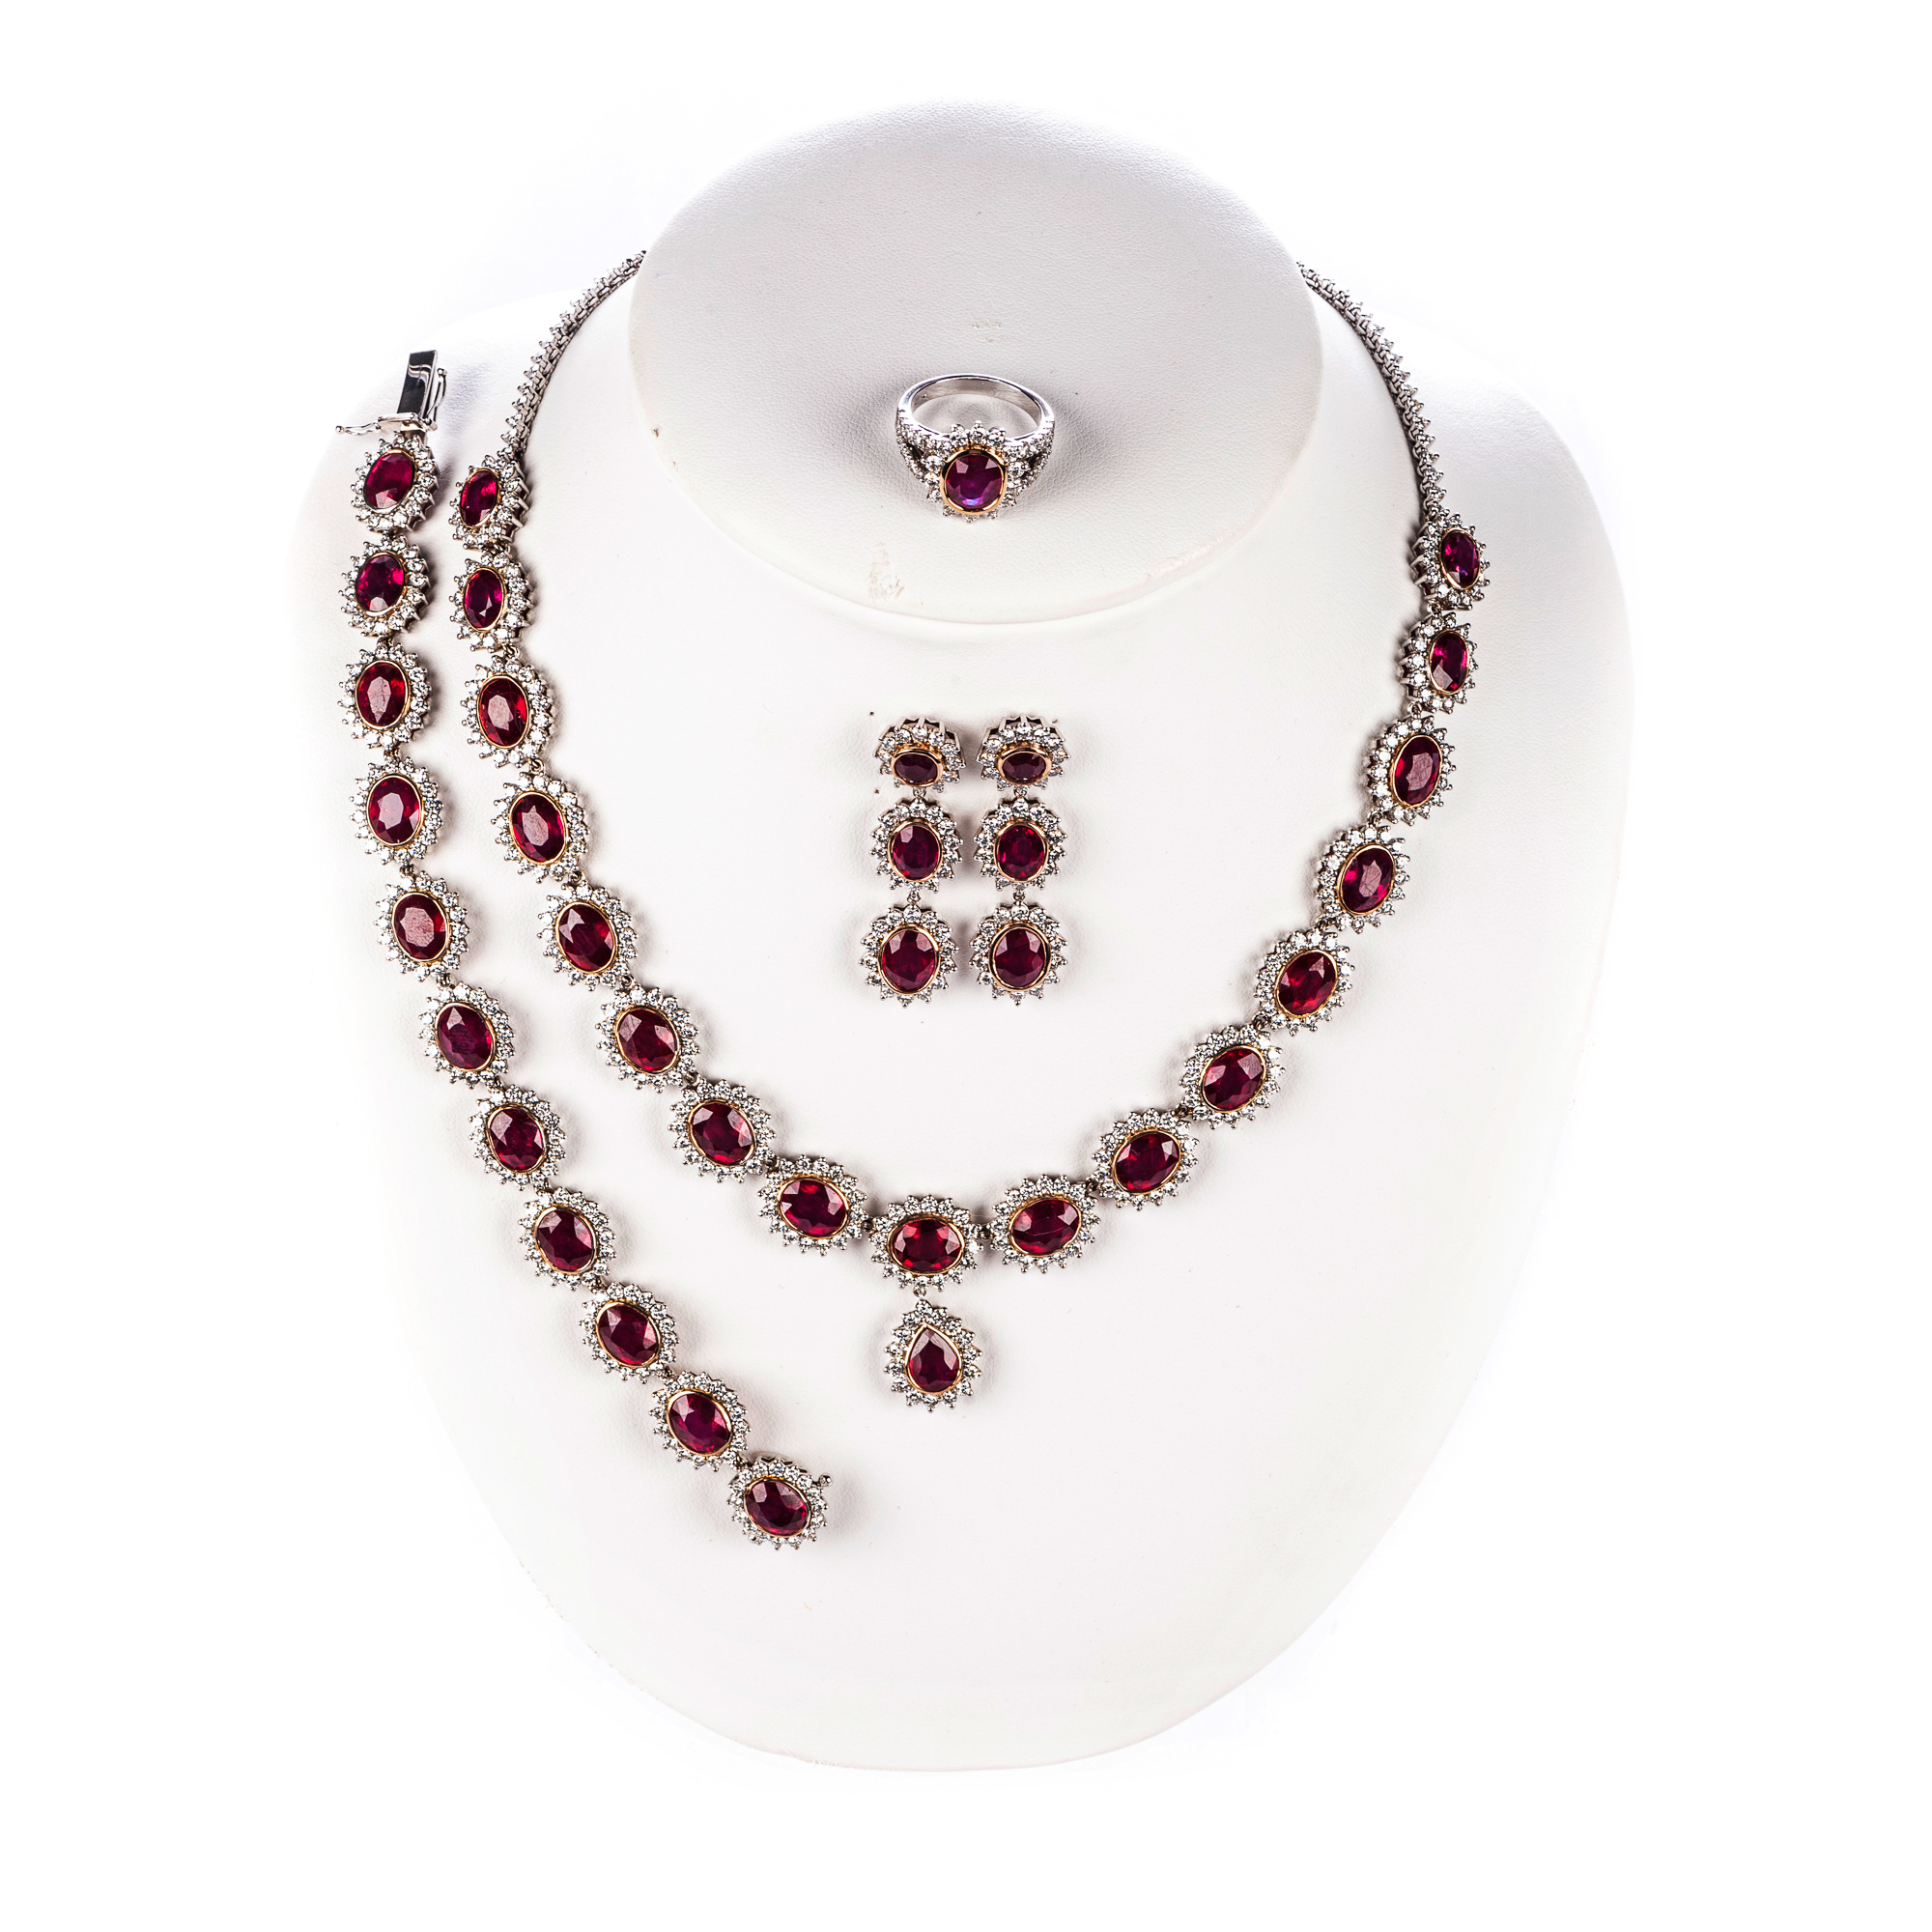 A FLORAL SUITE OF DIAMOND AND RUBY JEWELLERY